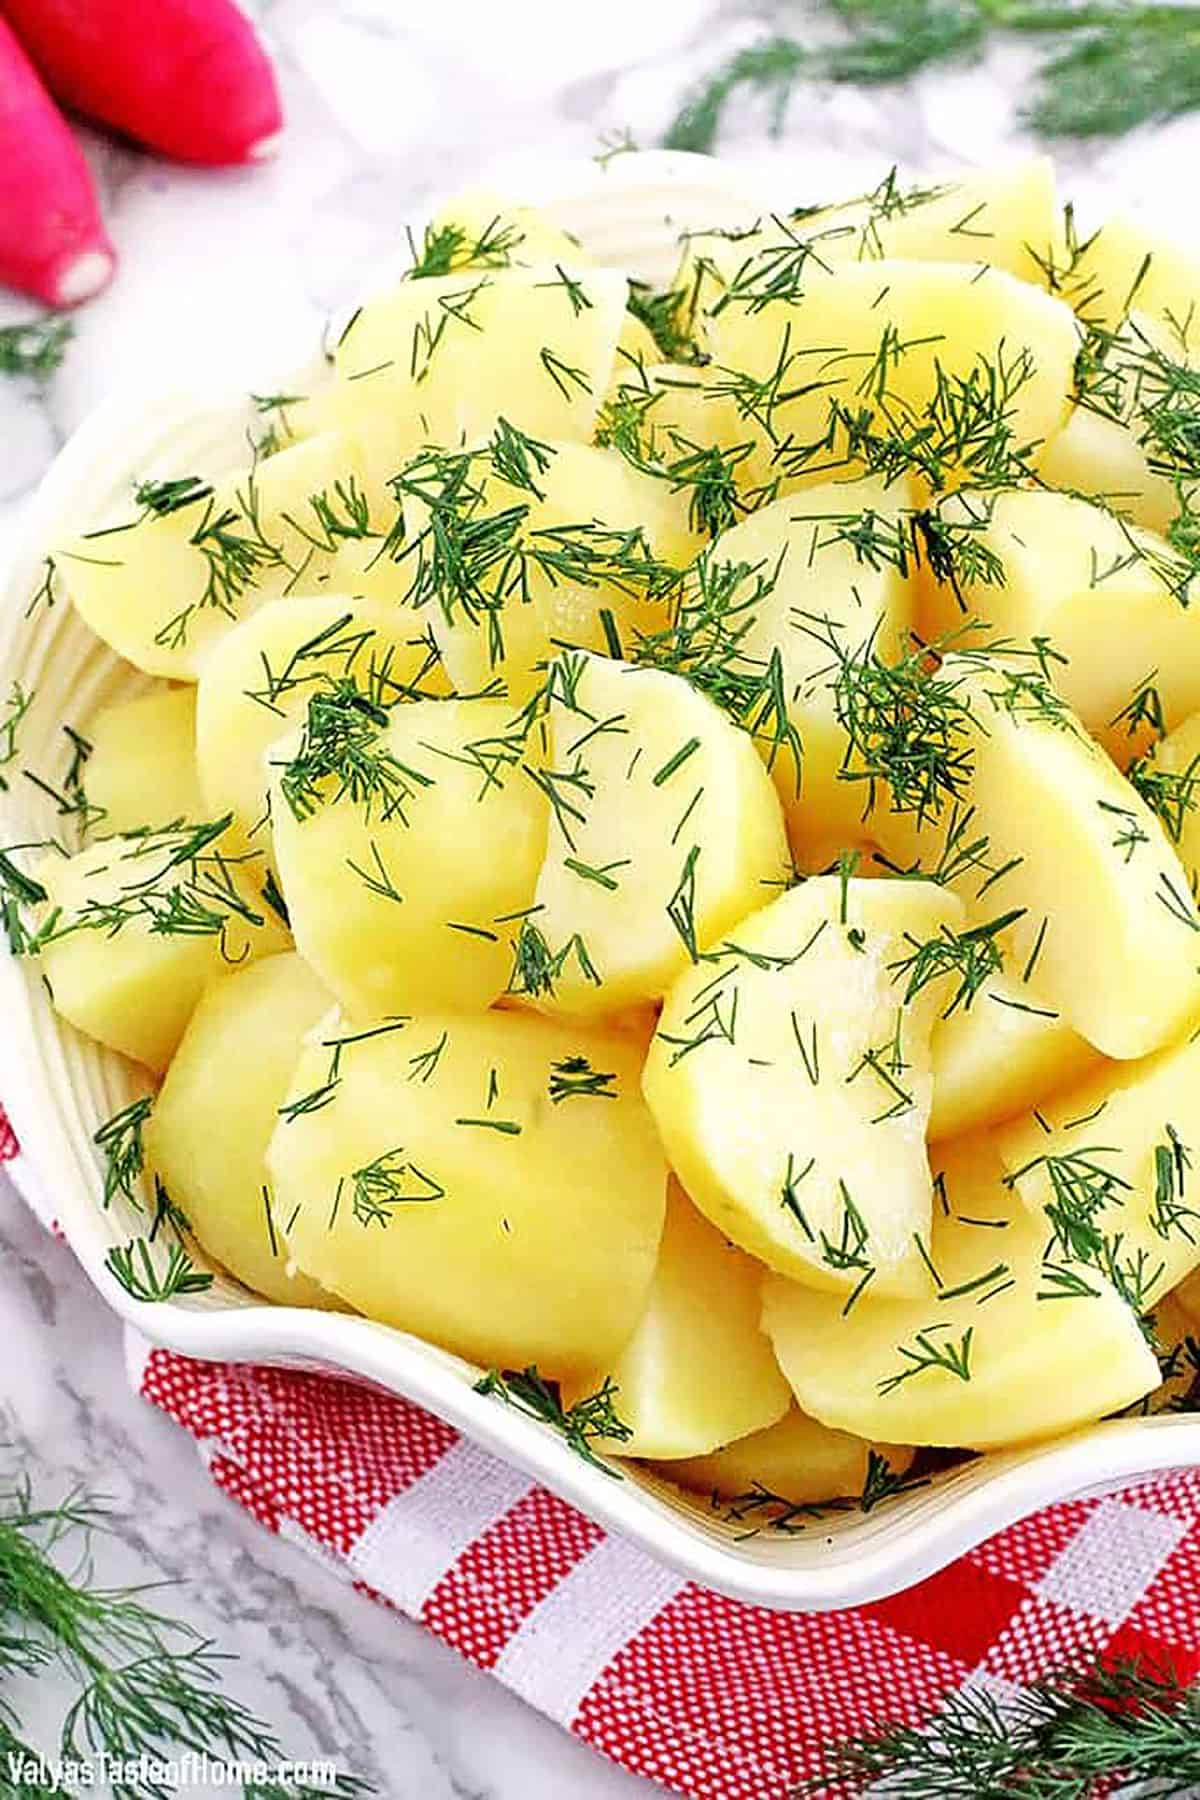 This Golden Potatoes recipe is the best one out there with potatoes that are perfectly creamy and tender on the inside, and perfectly seasoned on the outside.